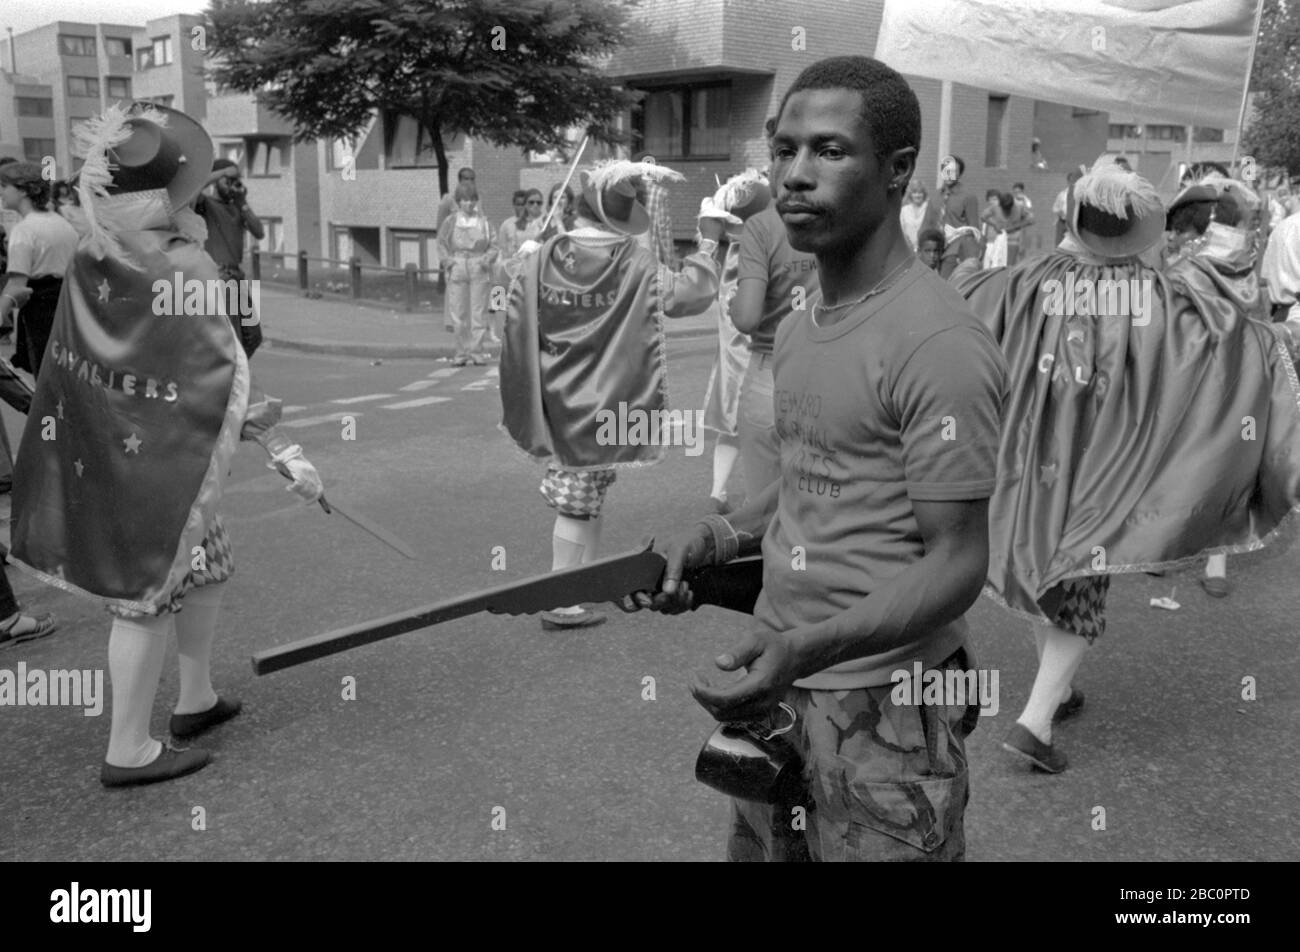 Man with realistic toy rifle gun 1980s UK Notting Hill Carnival 1981 ...